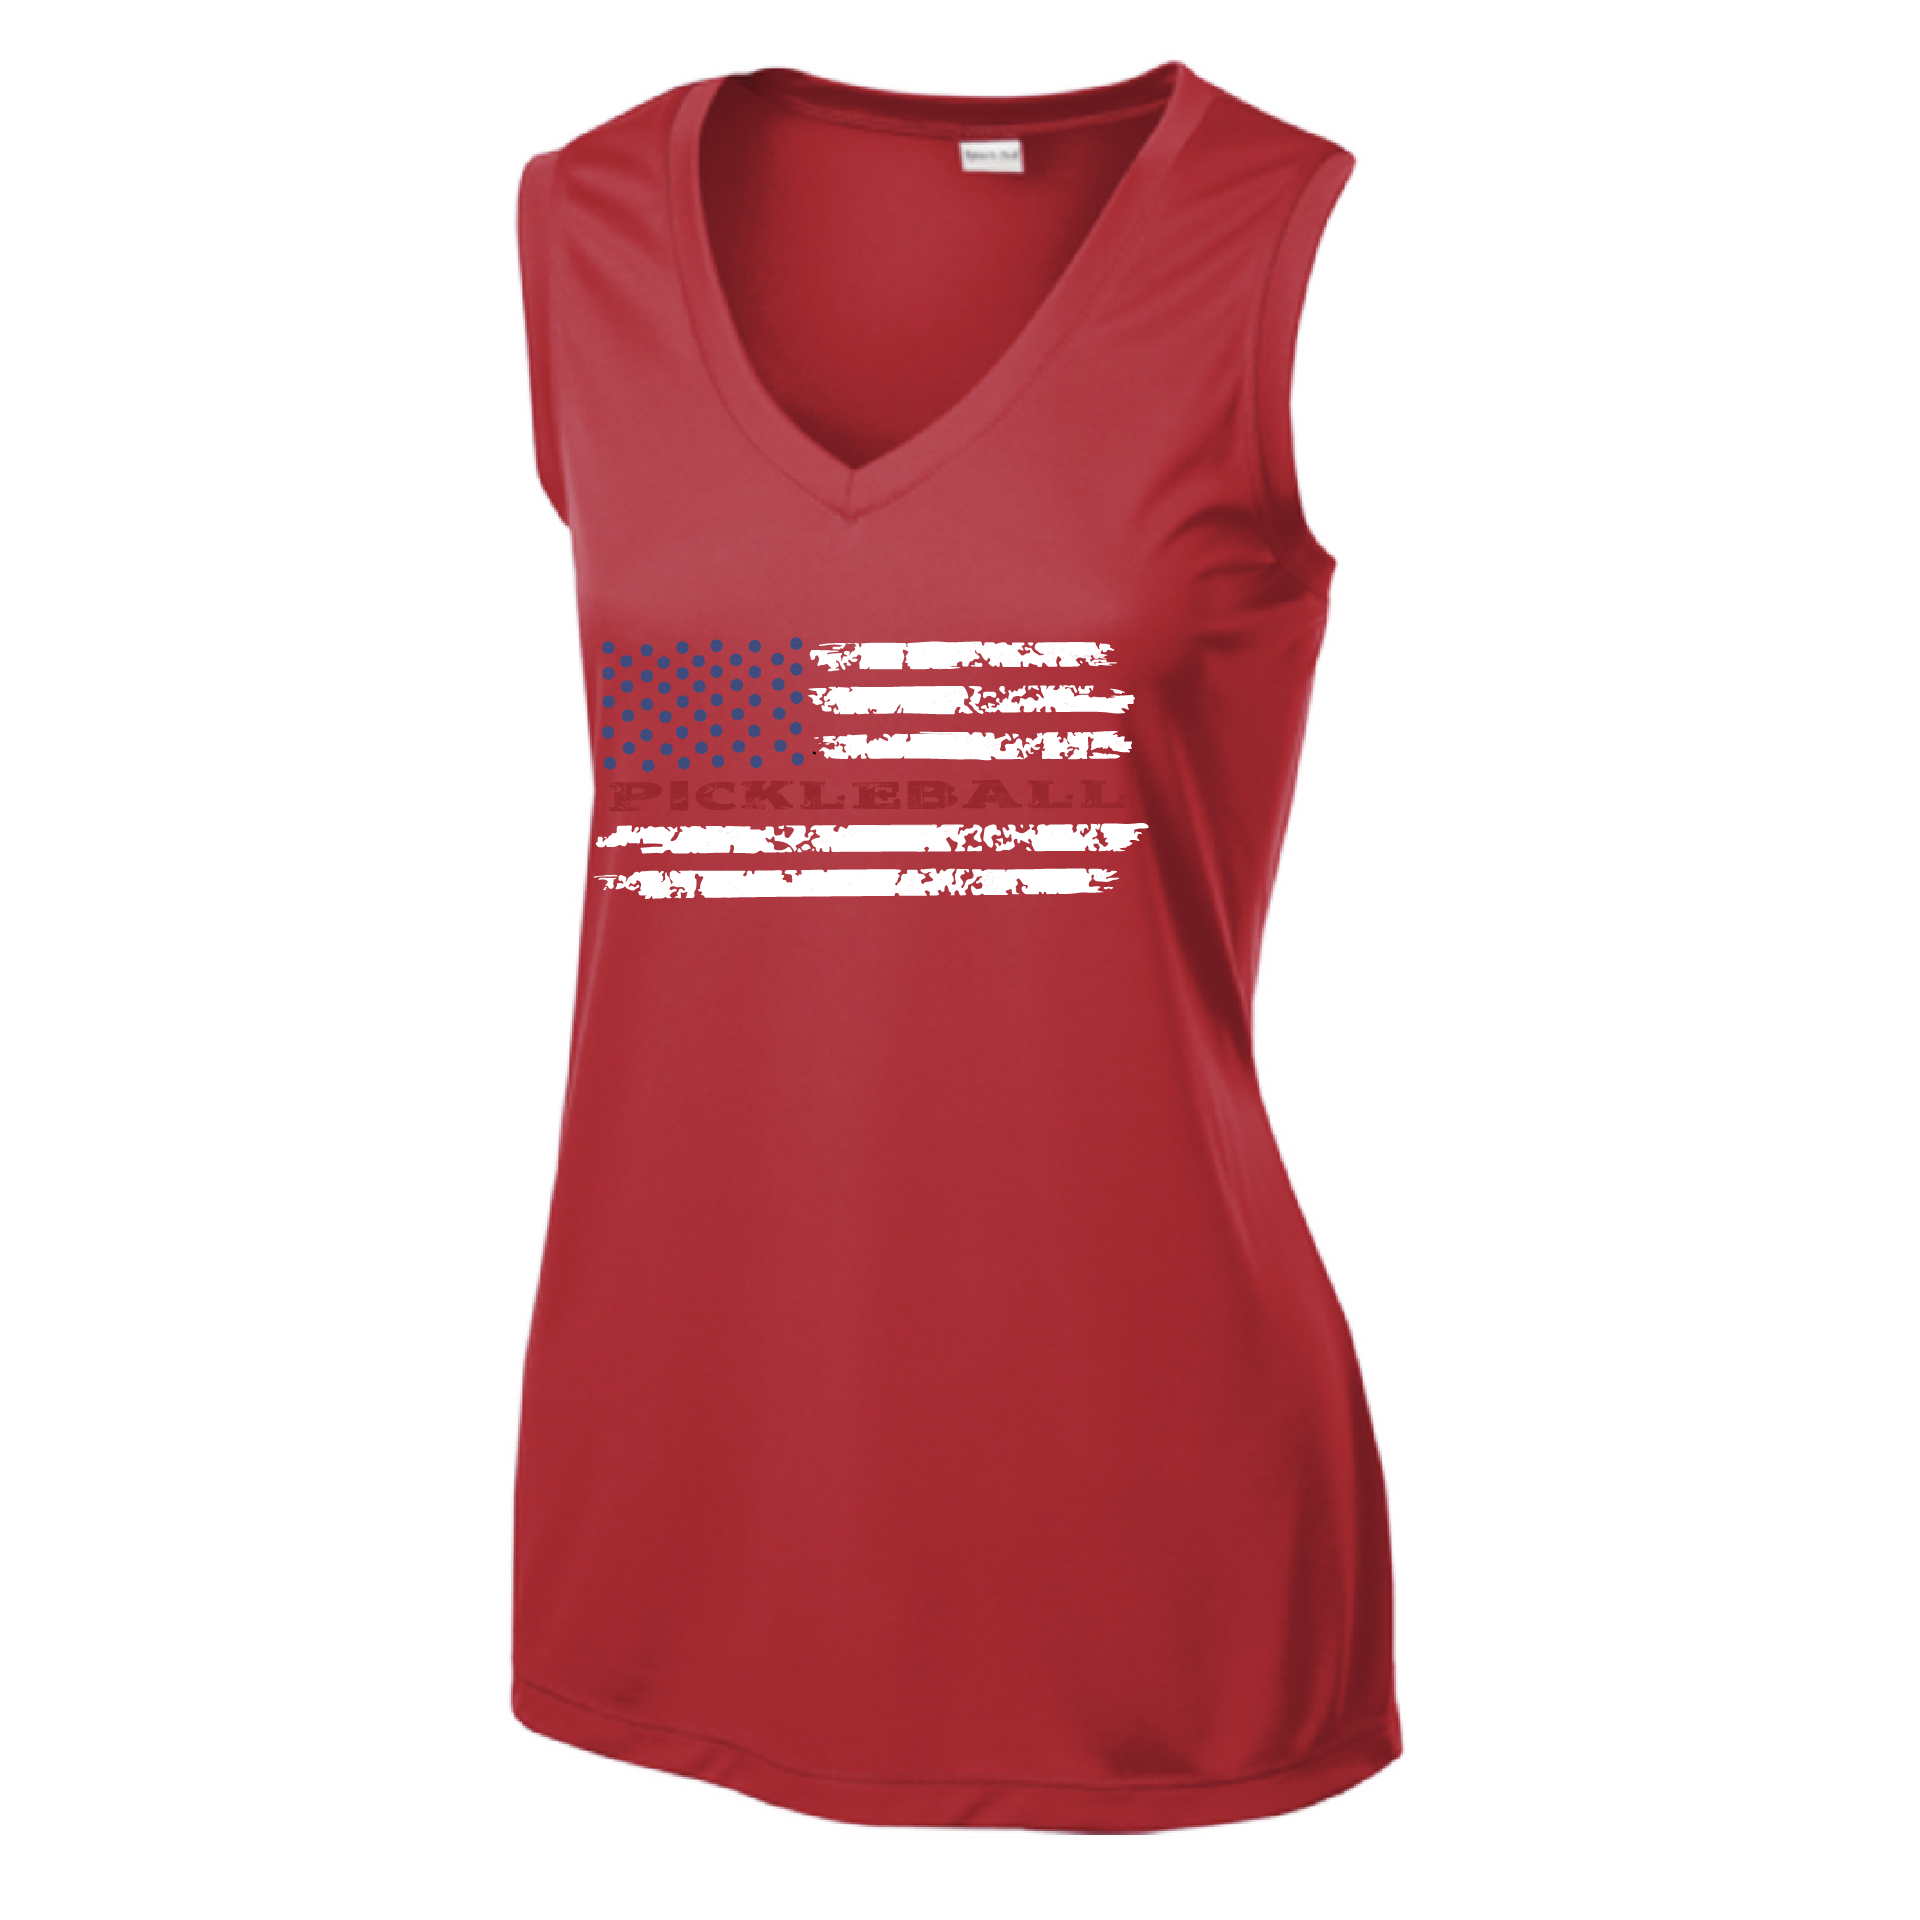 Pickleball Design: Pickleball Flag Horizontal on Front or Back of Shirt  Women's Style: Sleeveless Tank  Turn up the volume in this Women's shirt with its perfect mix of softness and attitude. Material is ultra-comfortable with moisture wicking properties and tri-blend softness. PosiCharge technology locks in color. Highly breathable and lightweight.